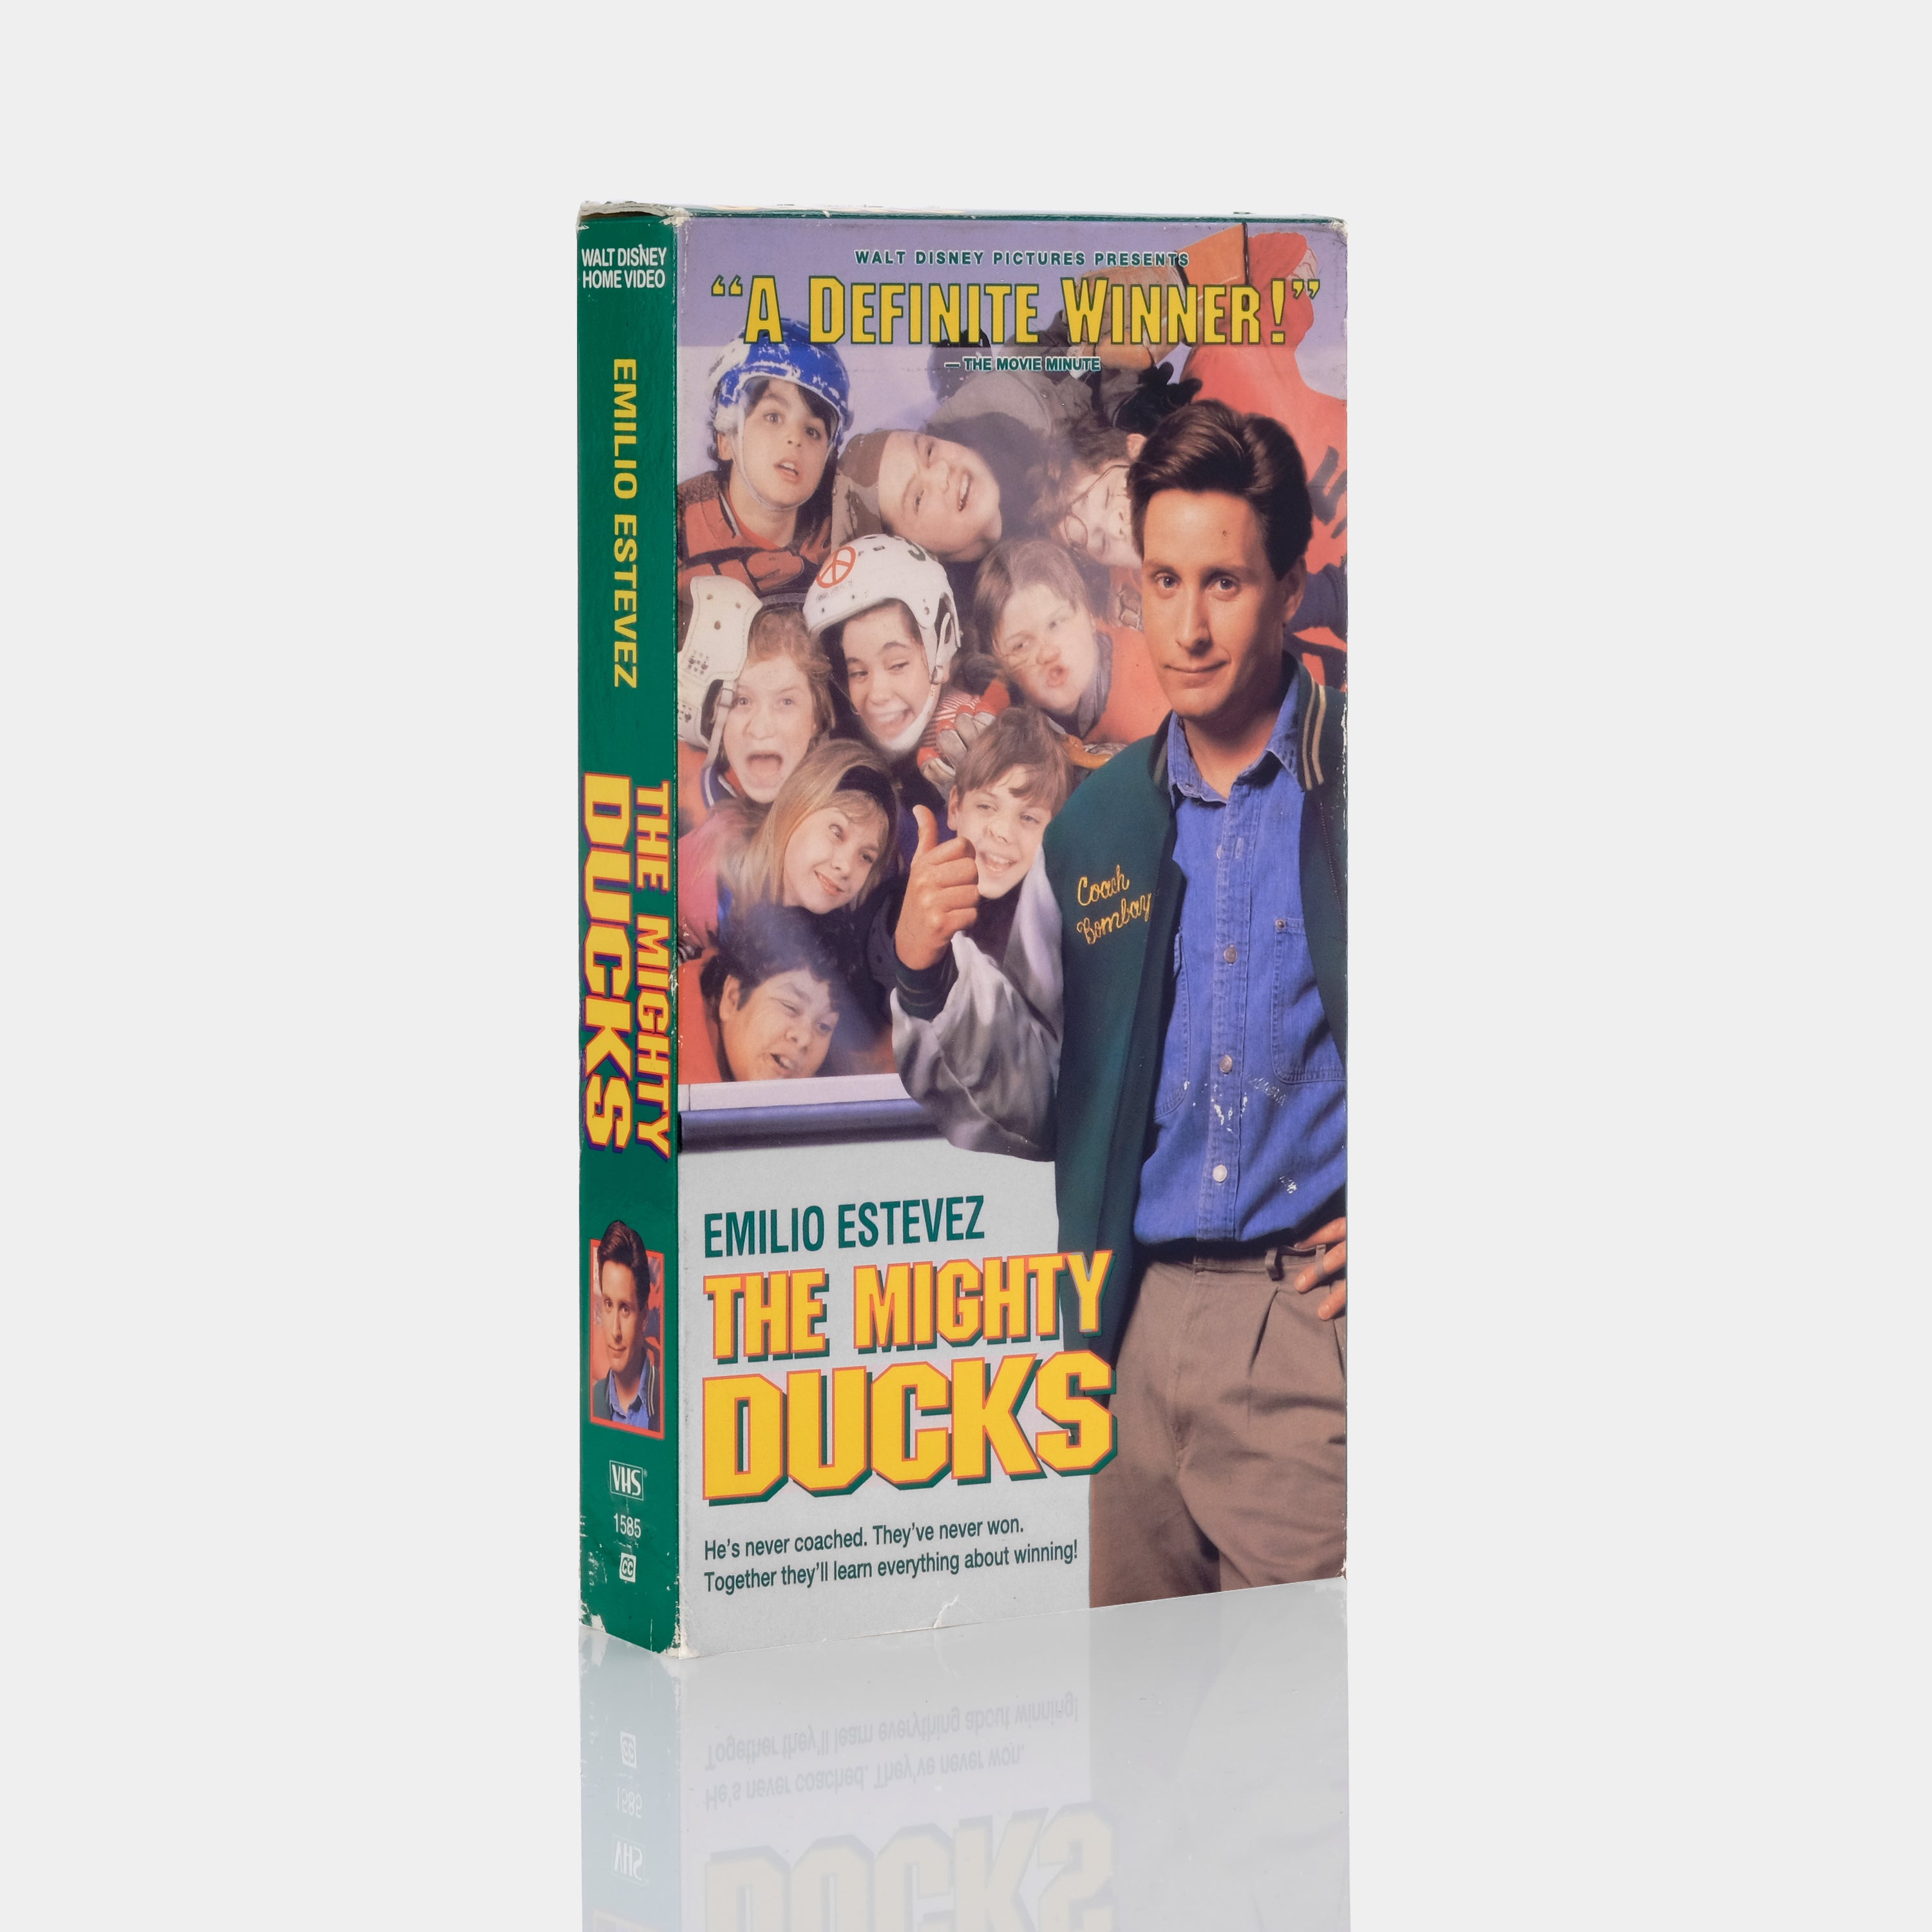 The Mighty Ducks VHS Tape